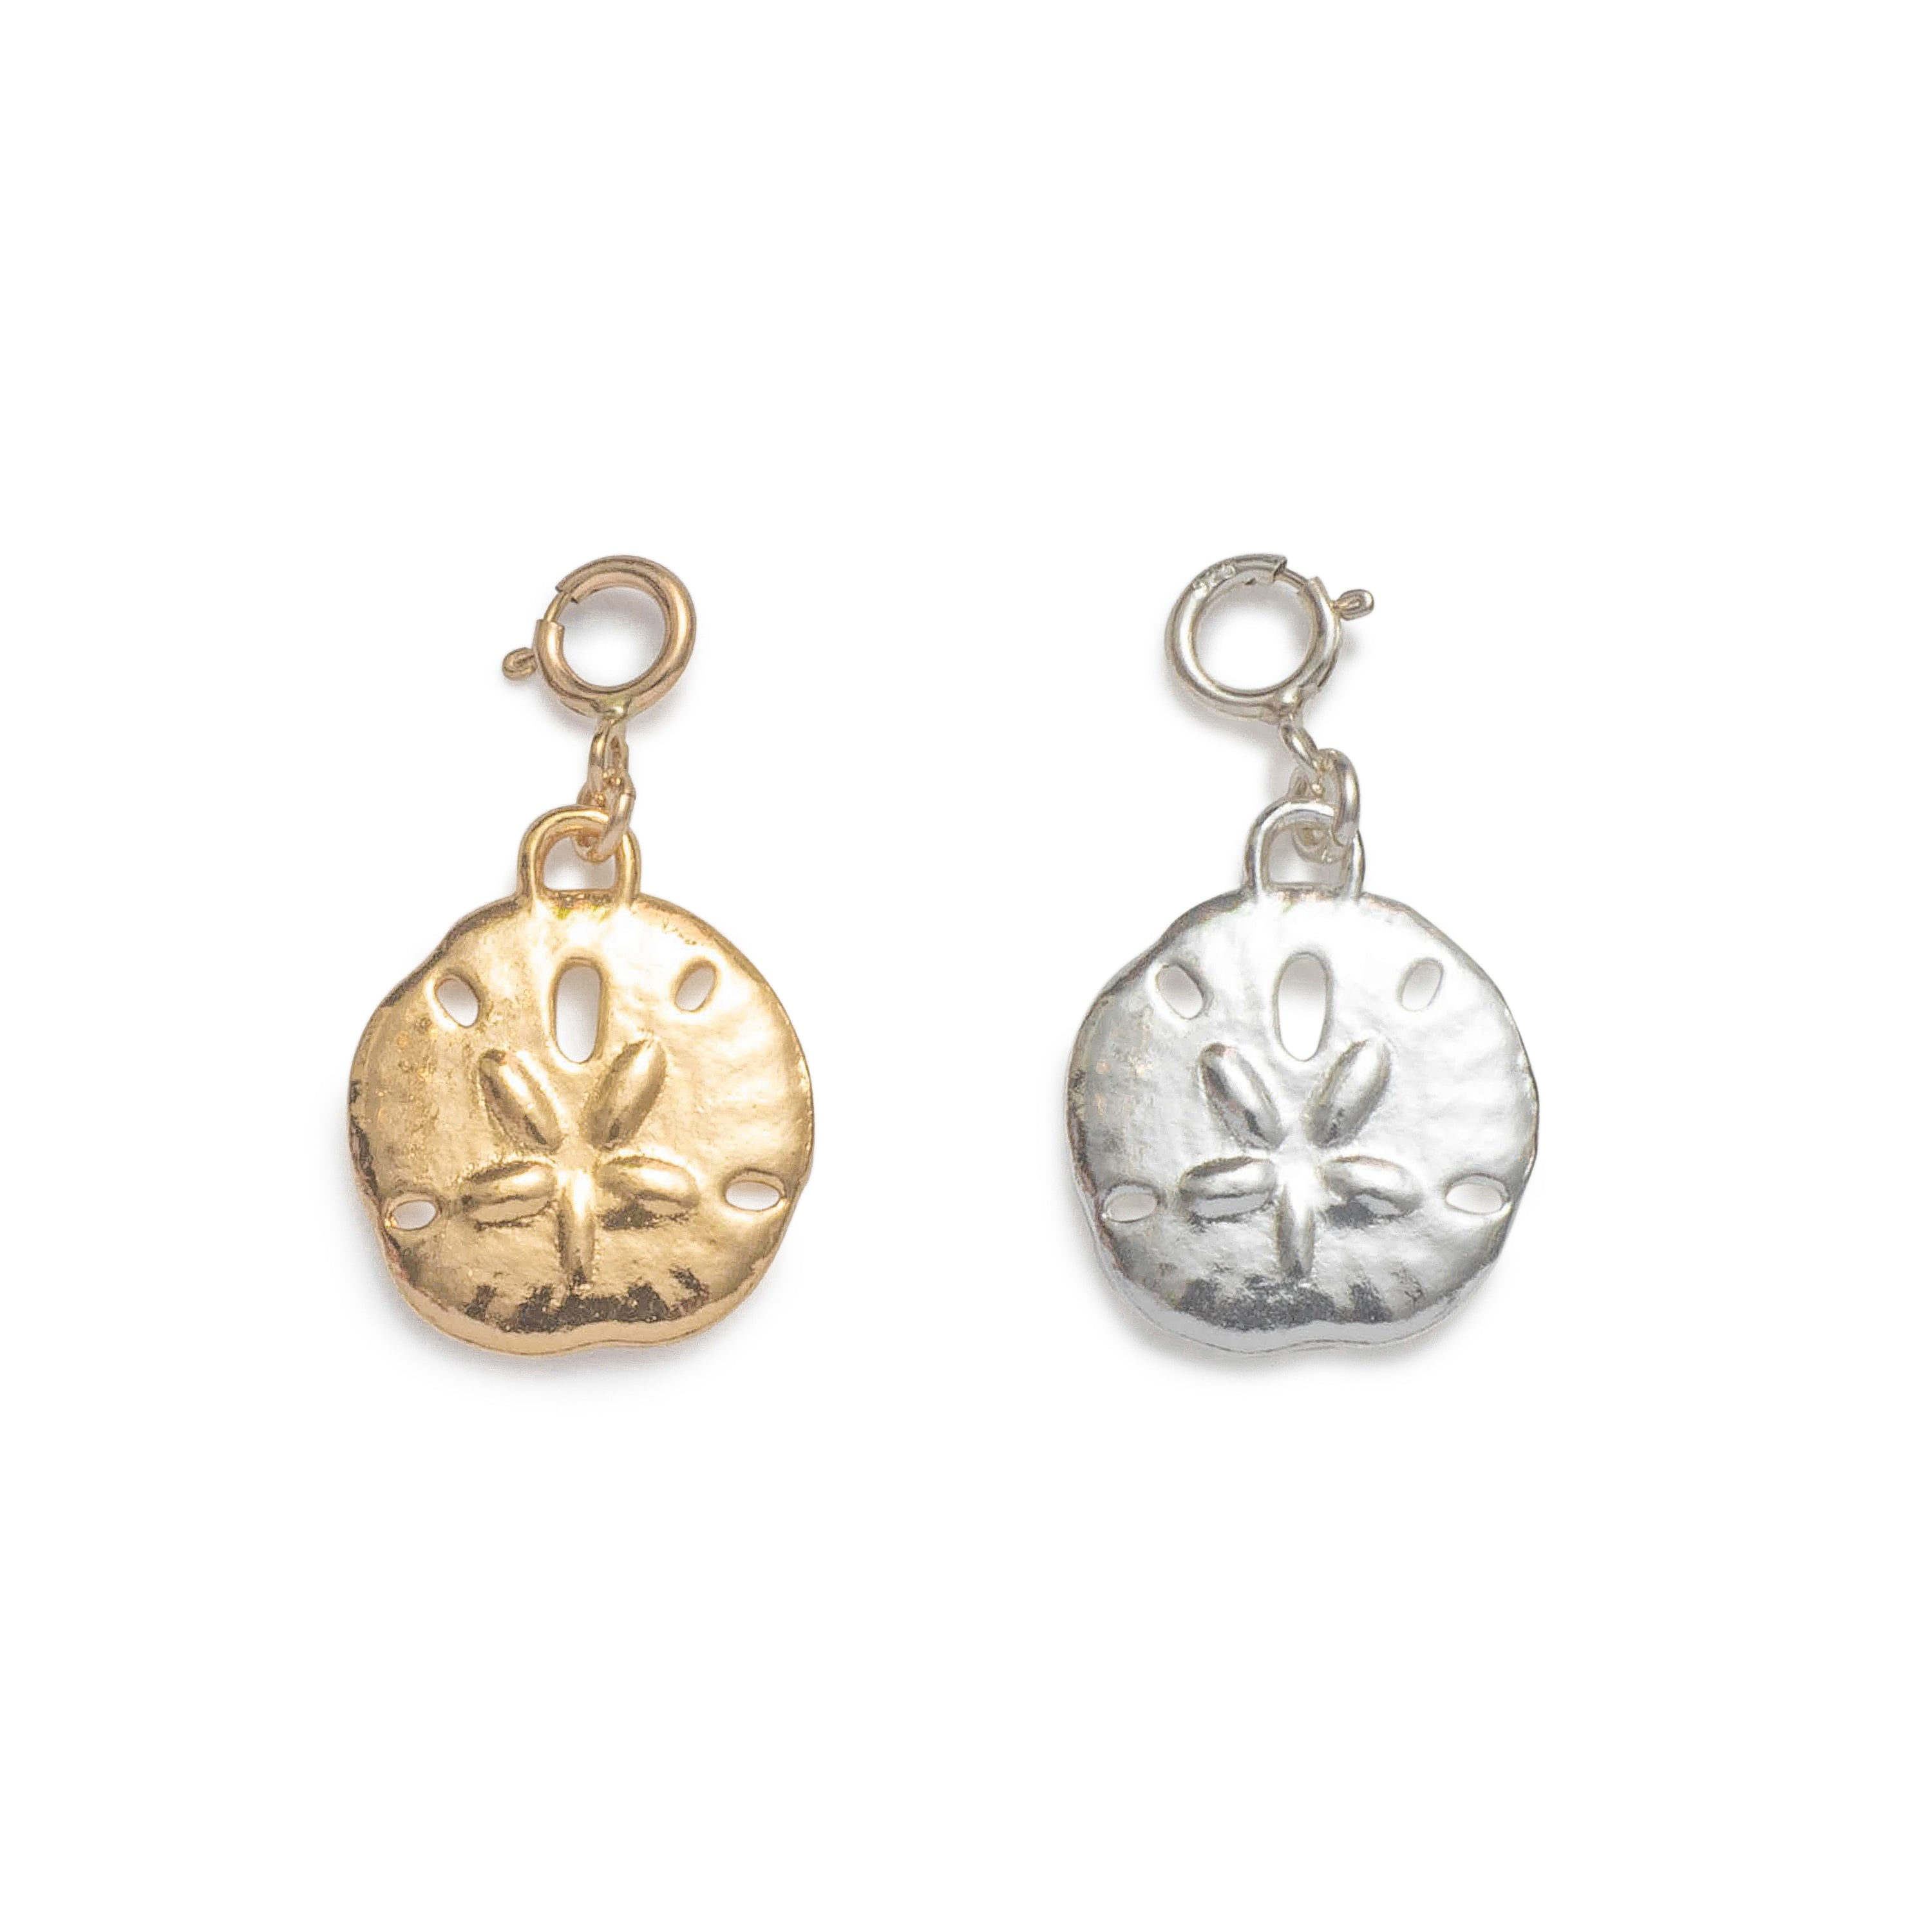 Sand Dollar Charm - Women's Charm in Sterling Silver or 14kt Gold